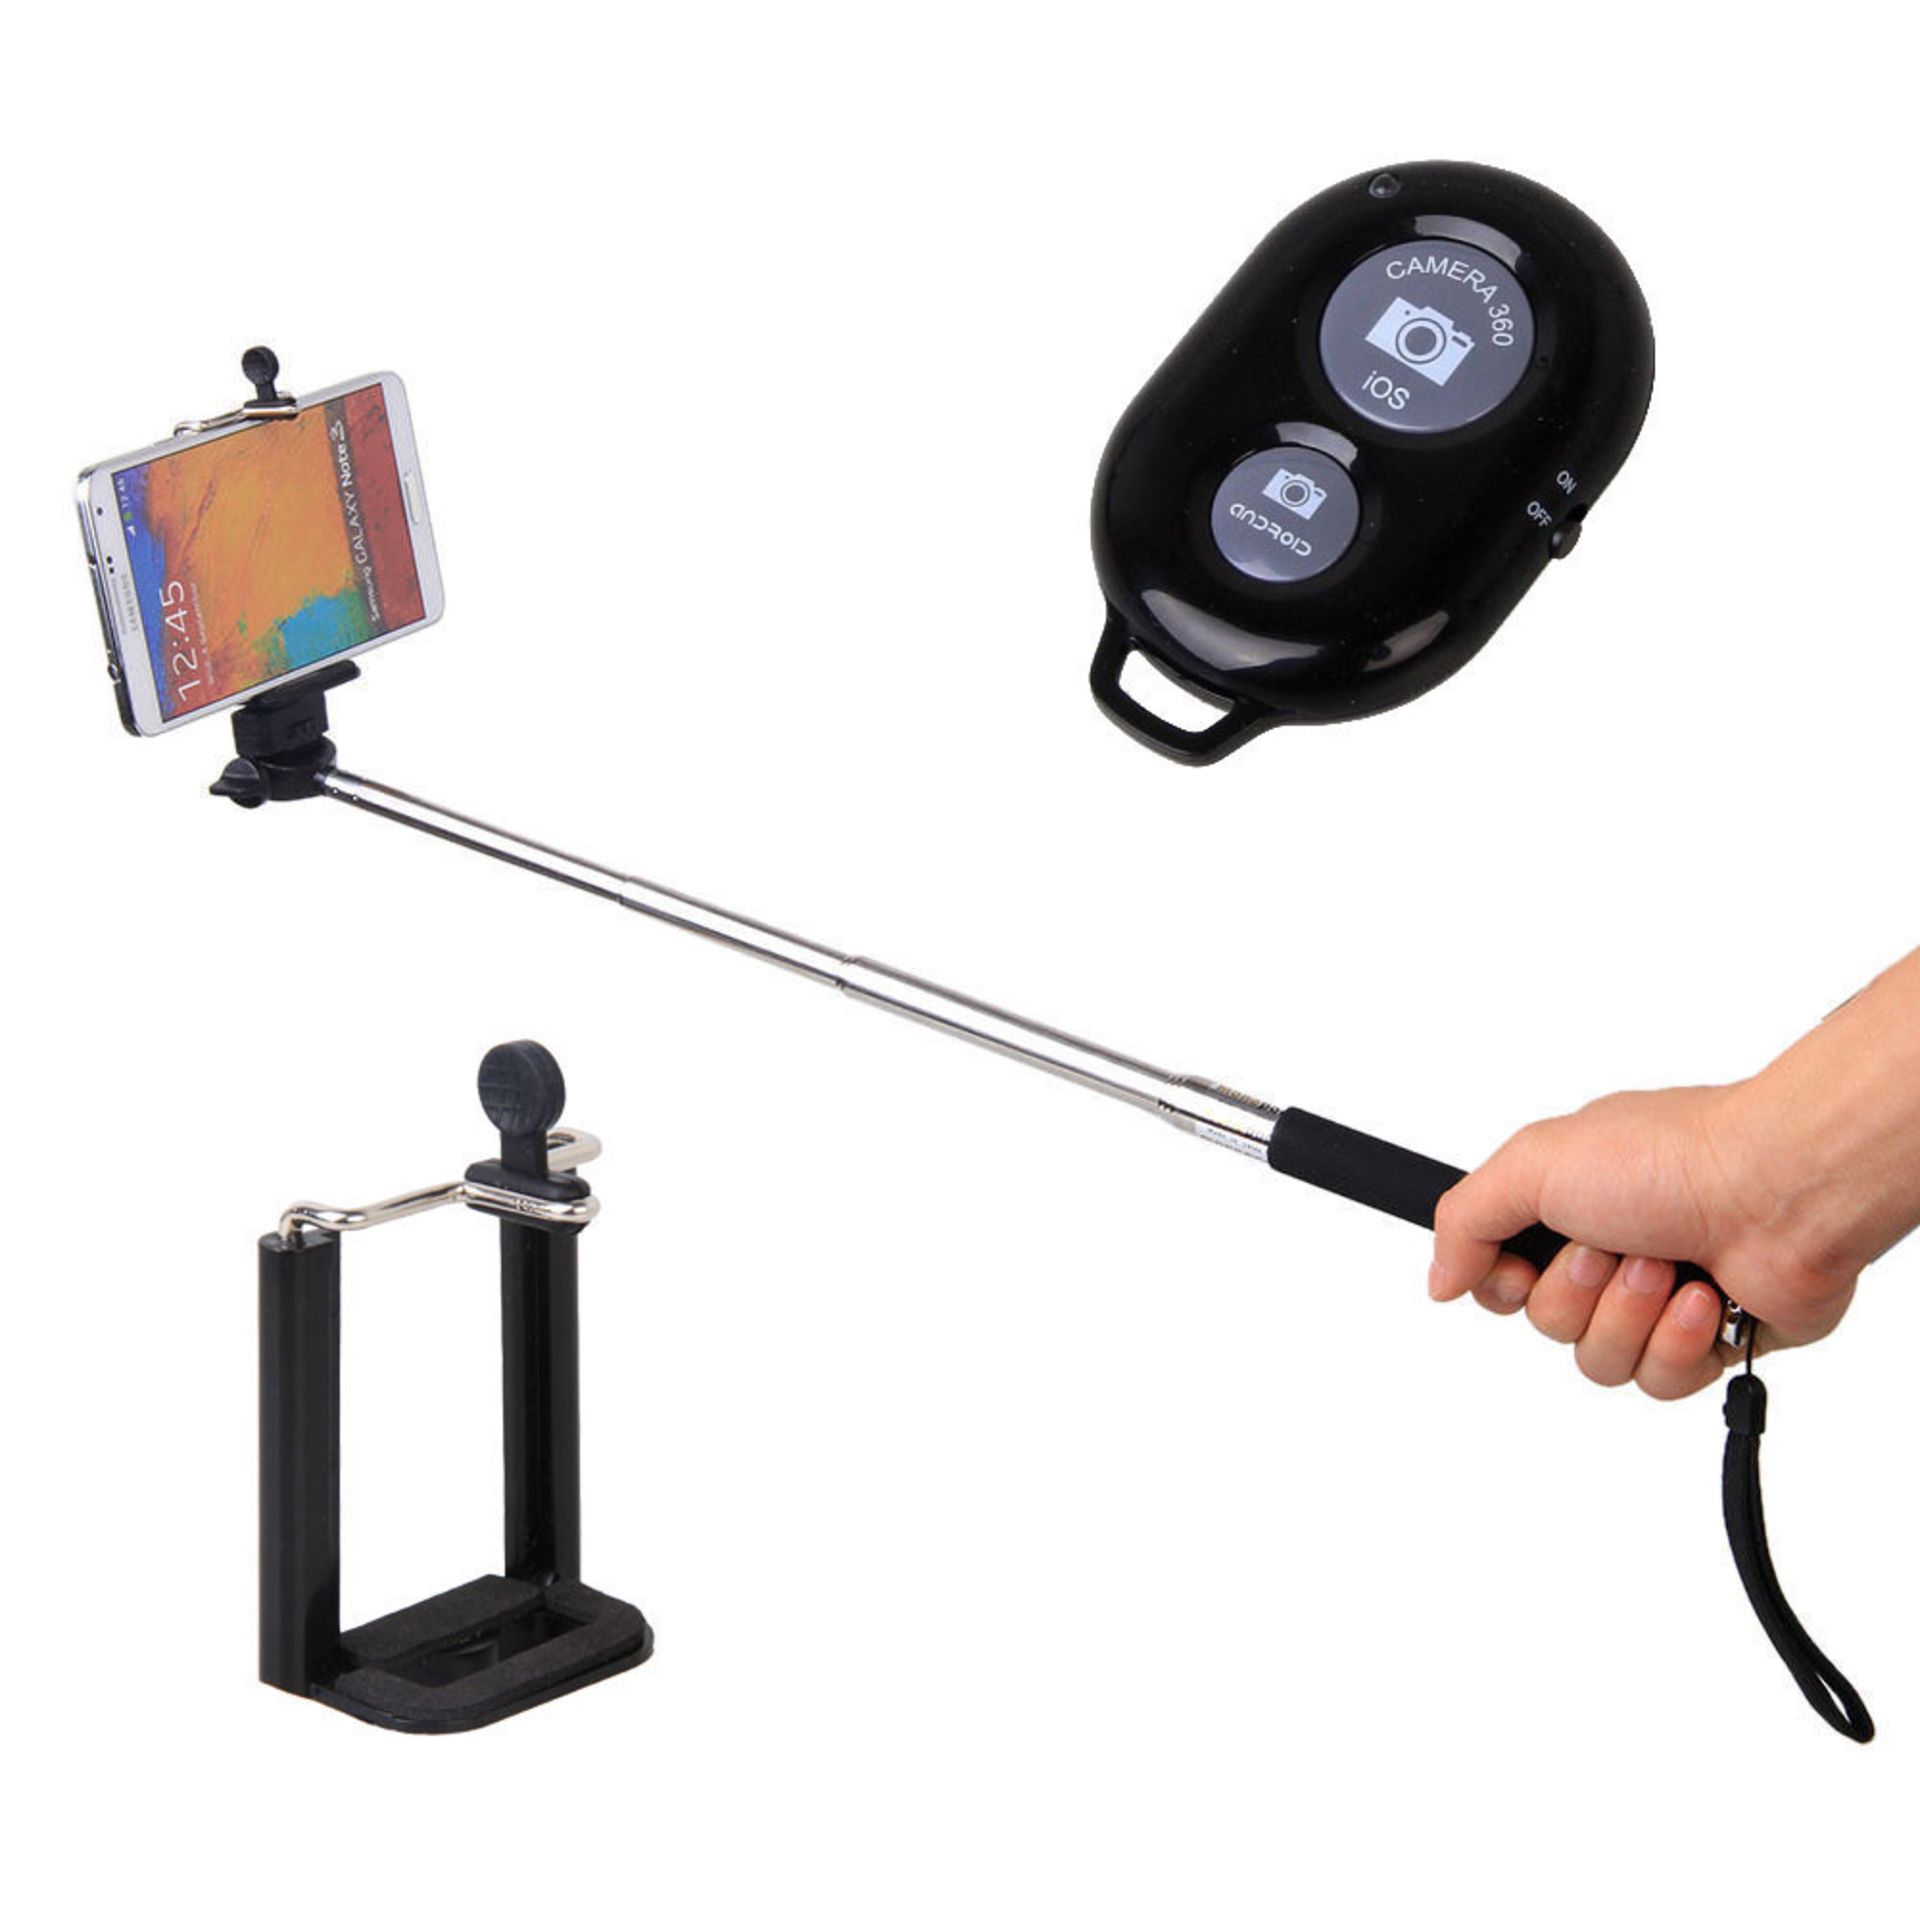 V *TRADE QTY* Brand New Selfie Stick with Bluetooth Remote Control - RRP £19.09 X 3 YOUR BID PRICE